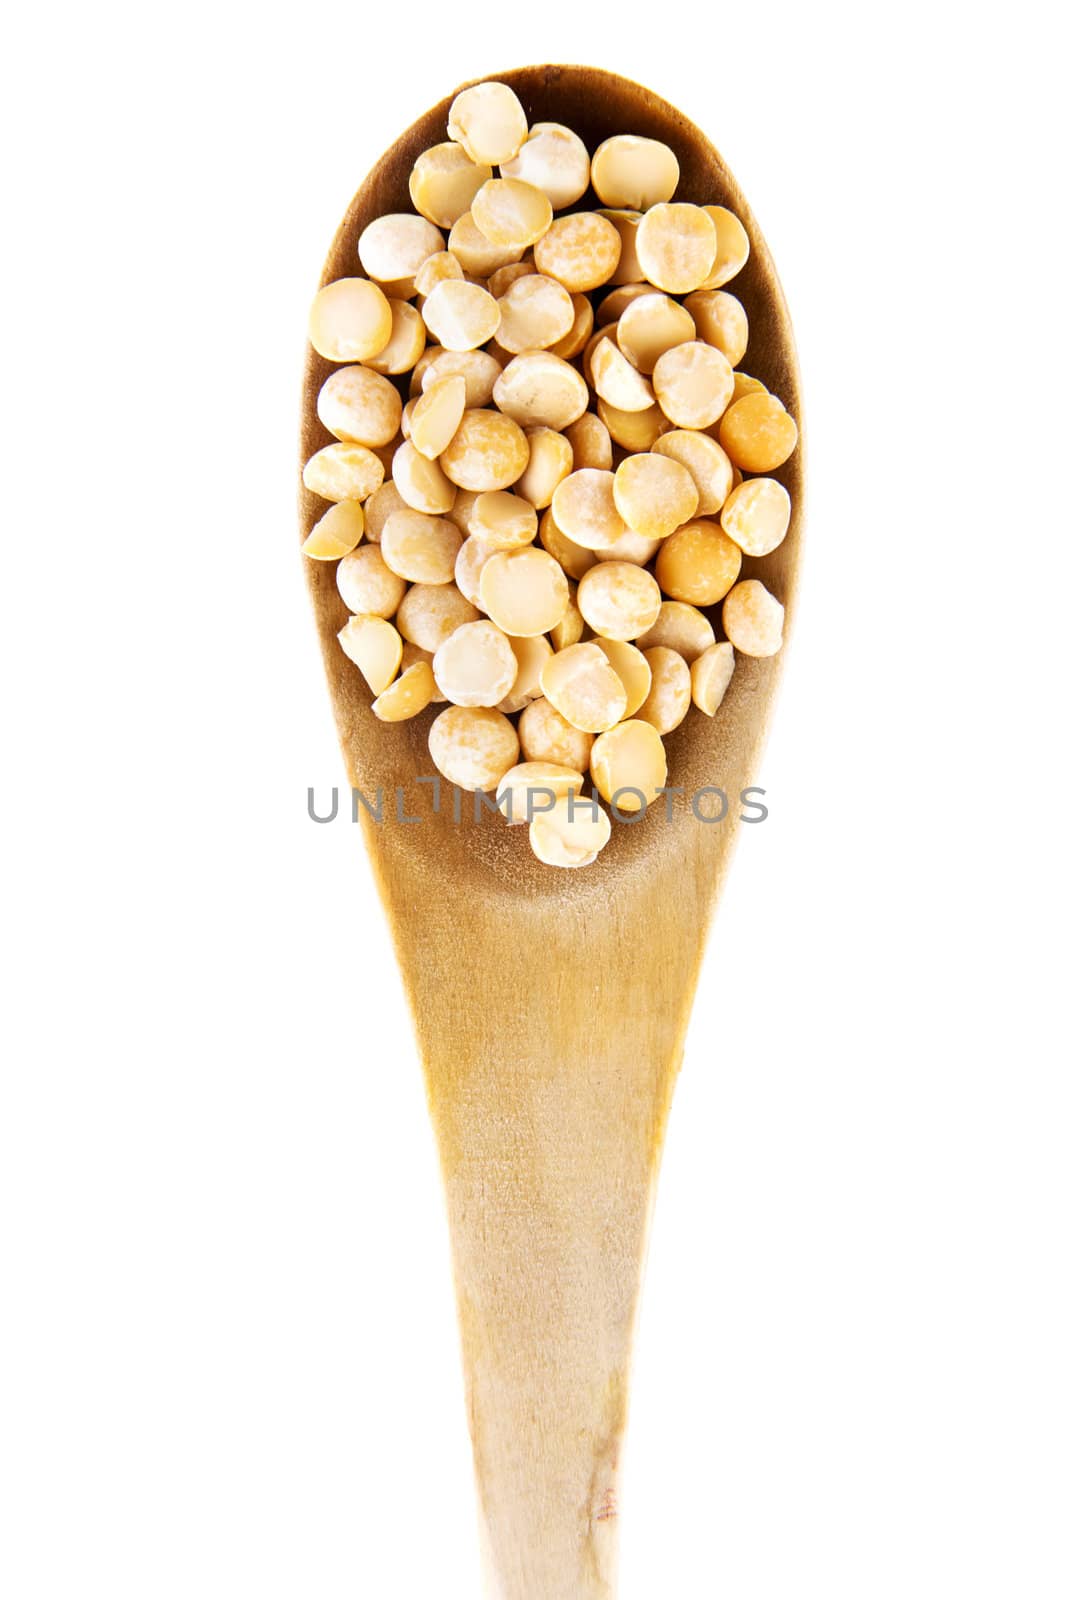 Dry peas on wooden spoon, isolated on white